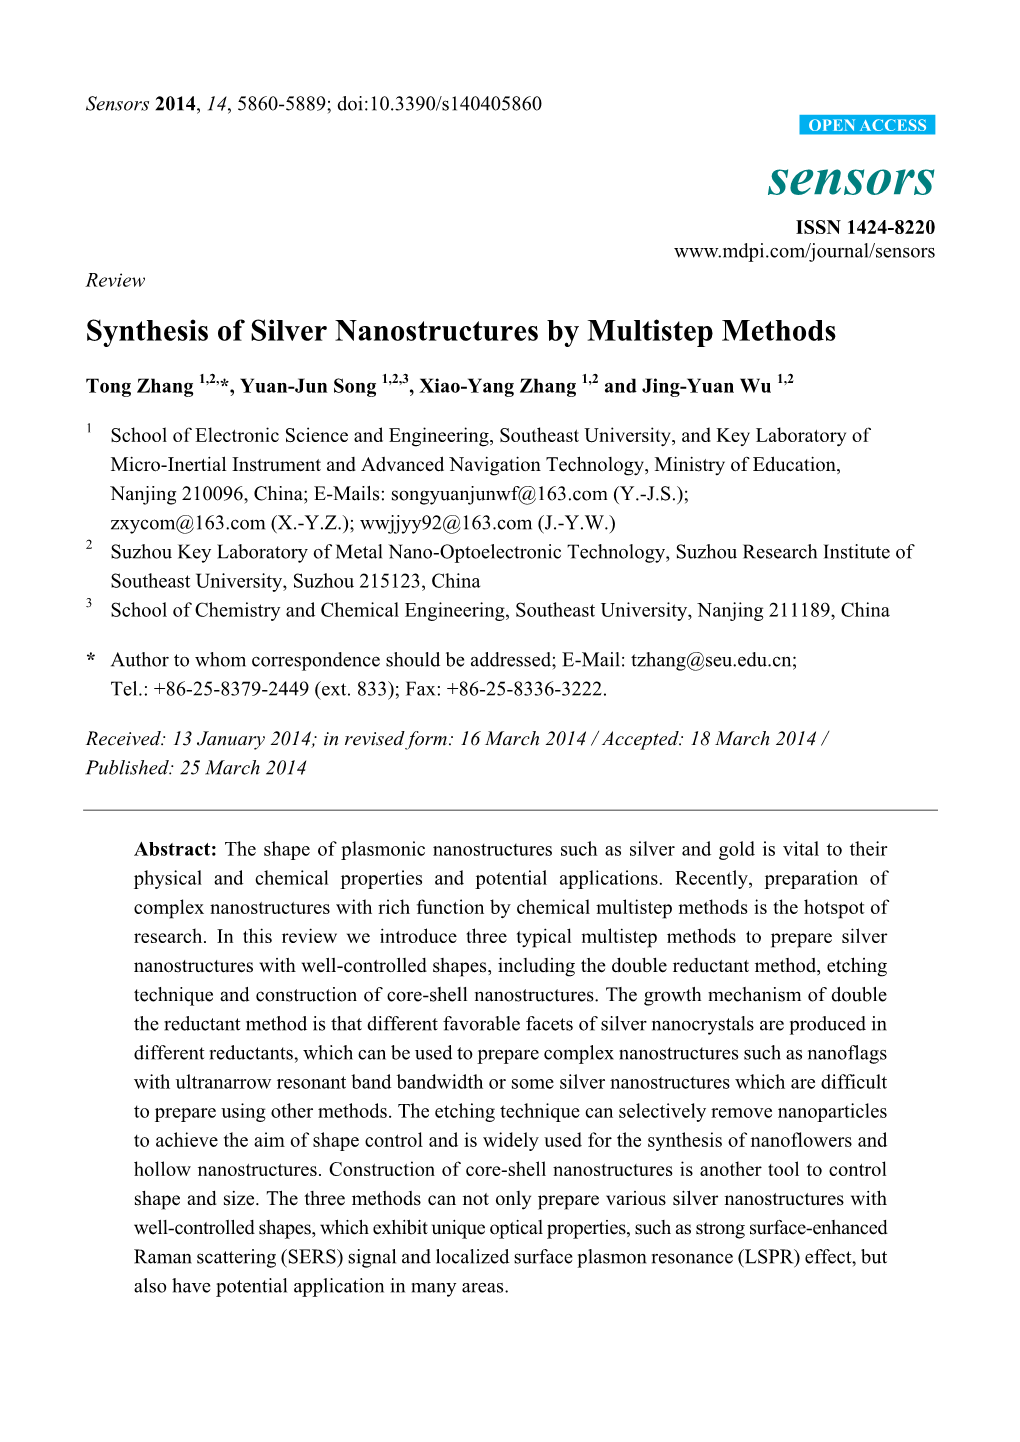 Synthesis of Silver Nanostructures by Multistep Methods